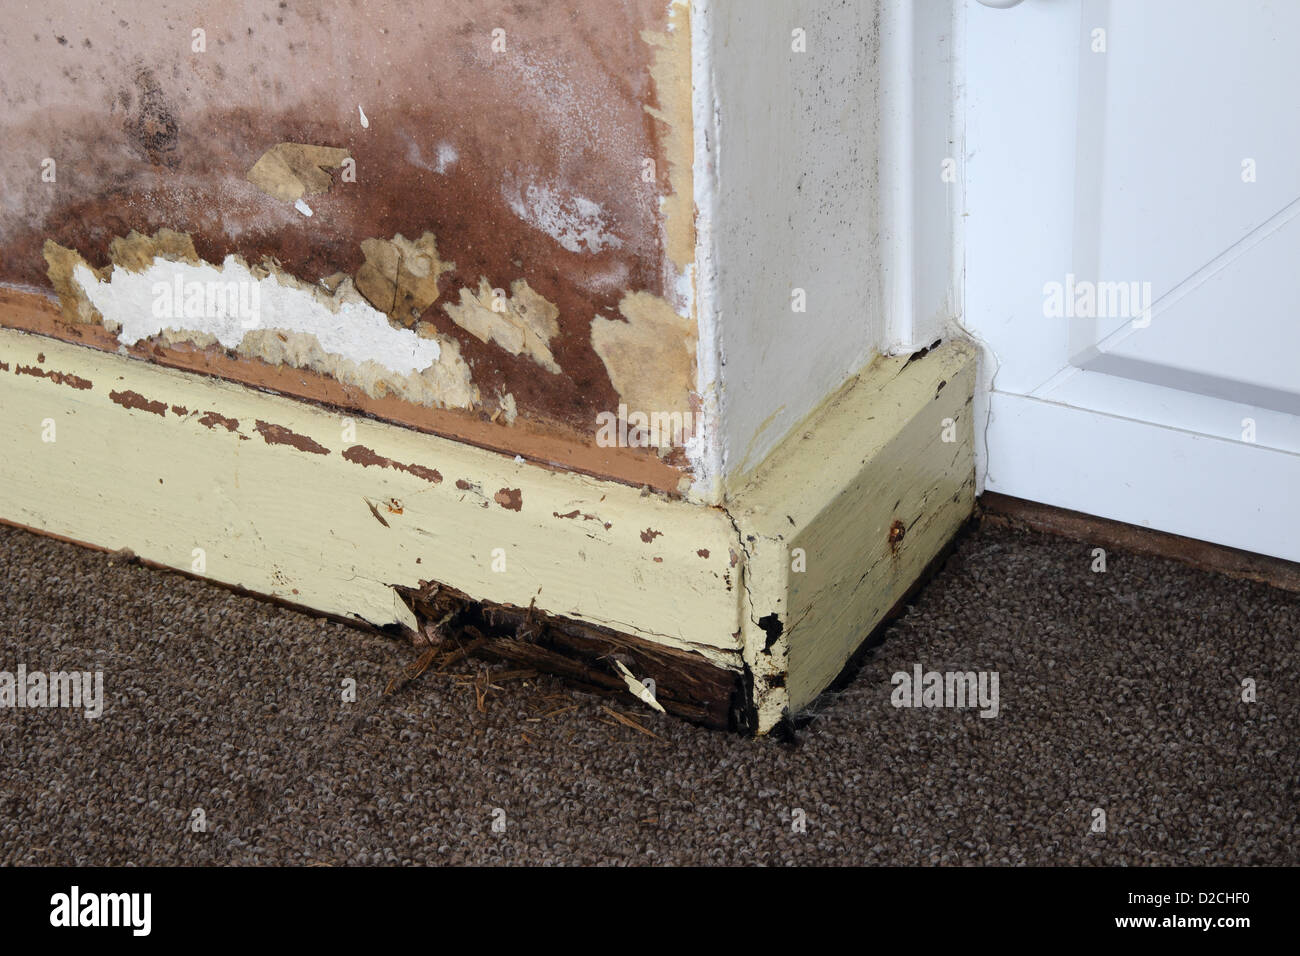 Rising Damp on an Internal Wall of a House with Rotten Skirting Board, UK PROPERTY RELEASED Stock Photo